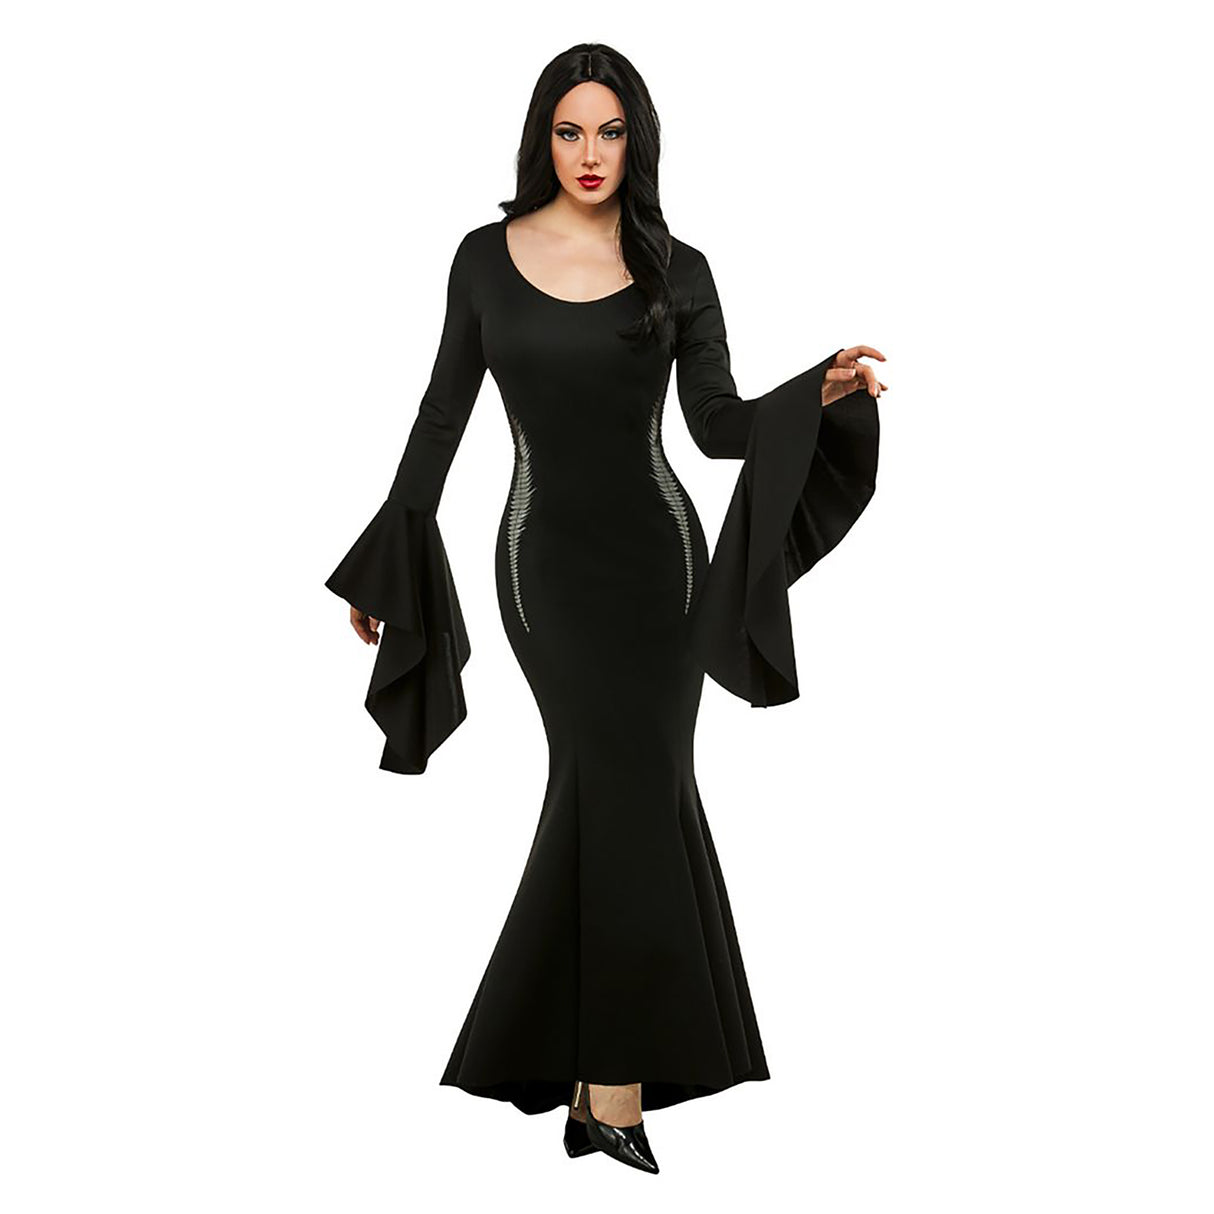 Rubies MORTICIA DELUXE ADULT COSTUME (WEDNESDAY), Black (Large)